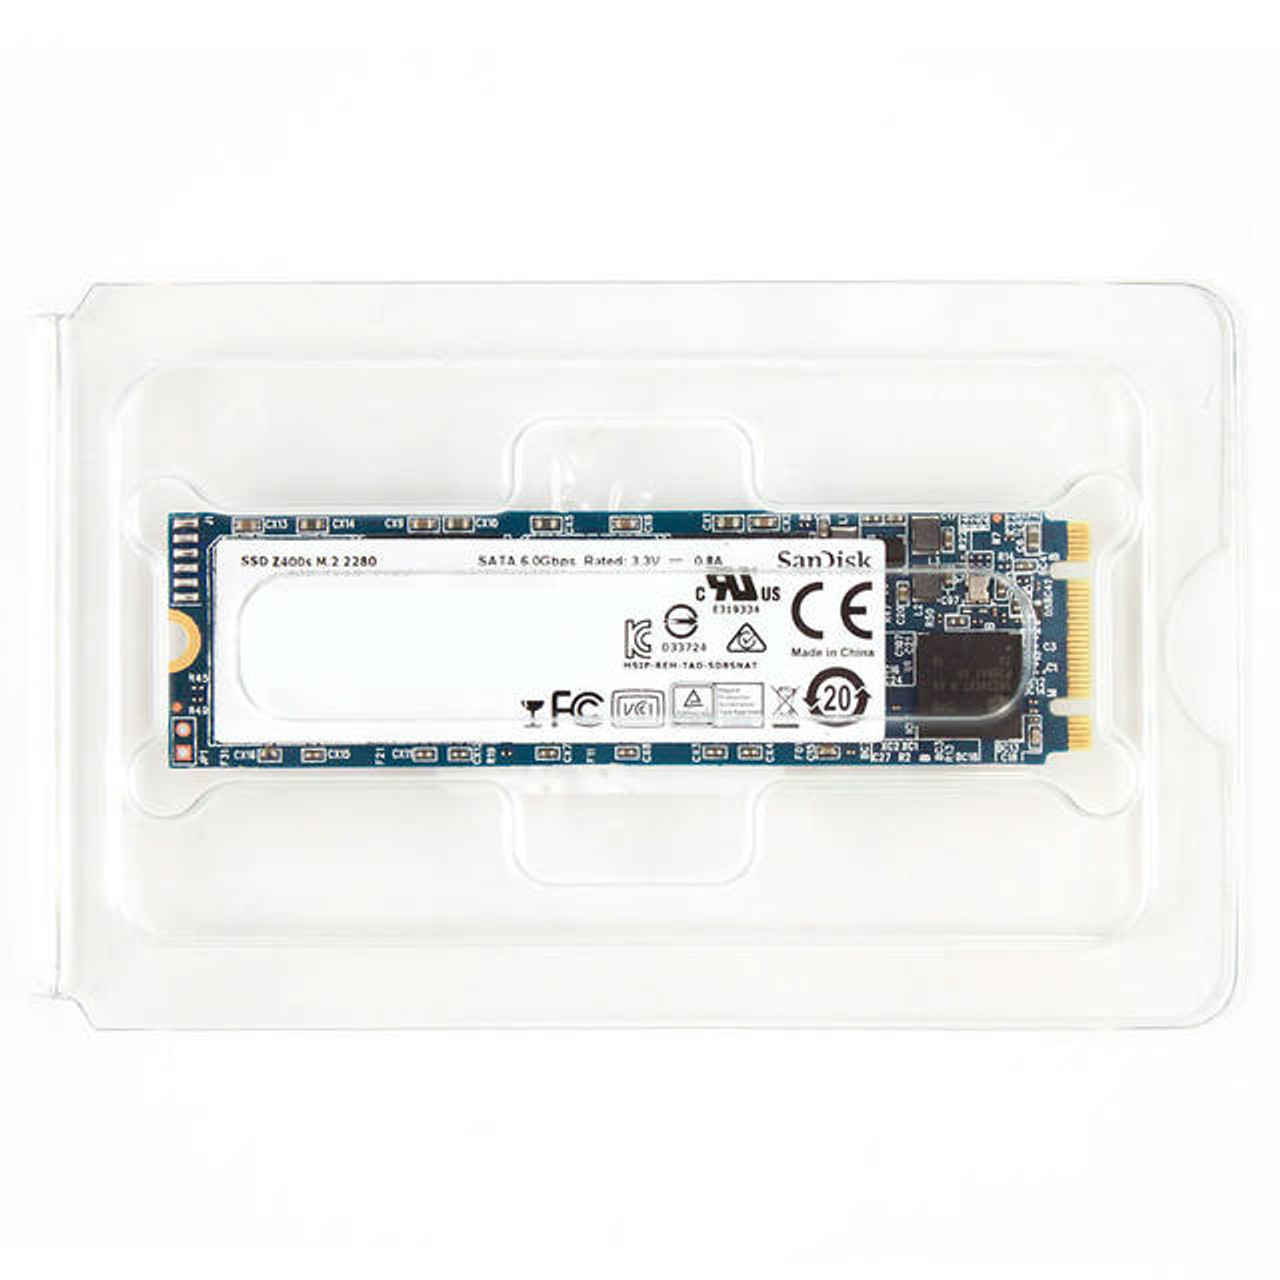 SD8SNAT-256G-1122 | Z400s SD8SNAT-256G-1122 M.2 inch SATA3 Solid State Drive